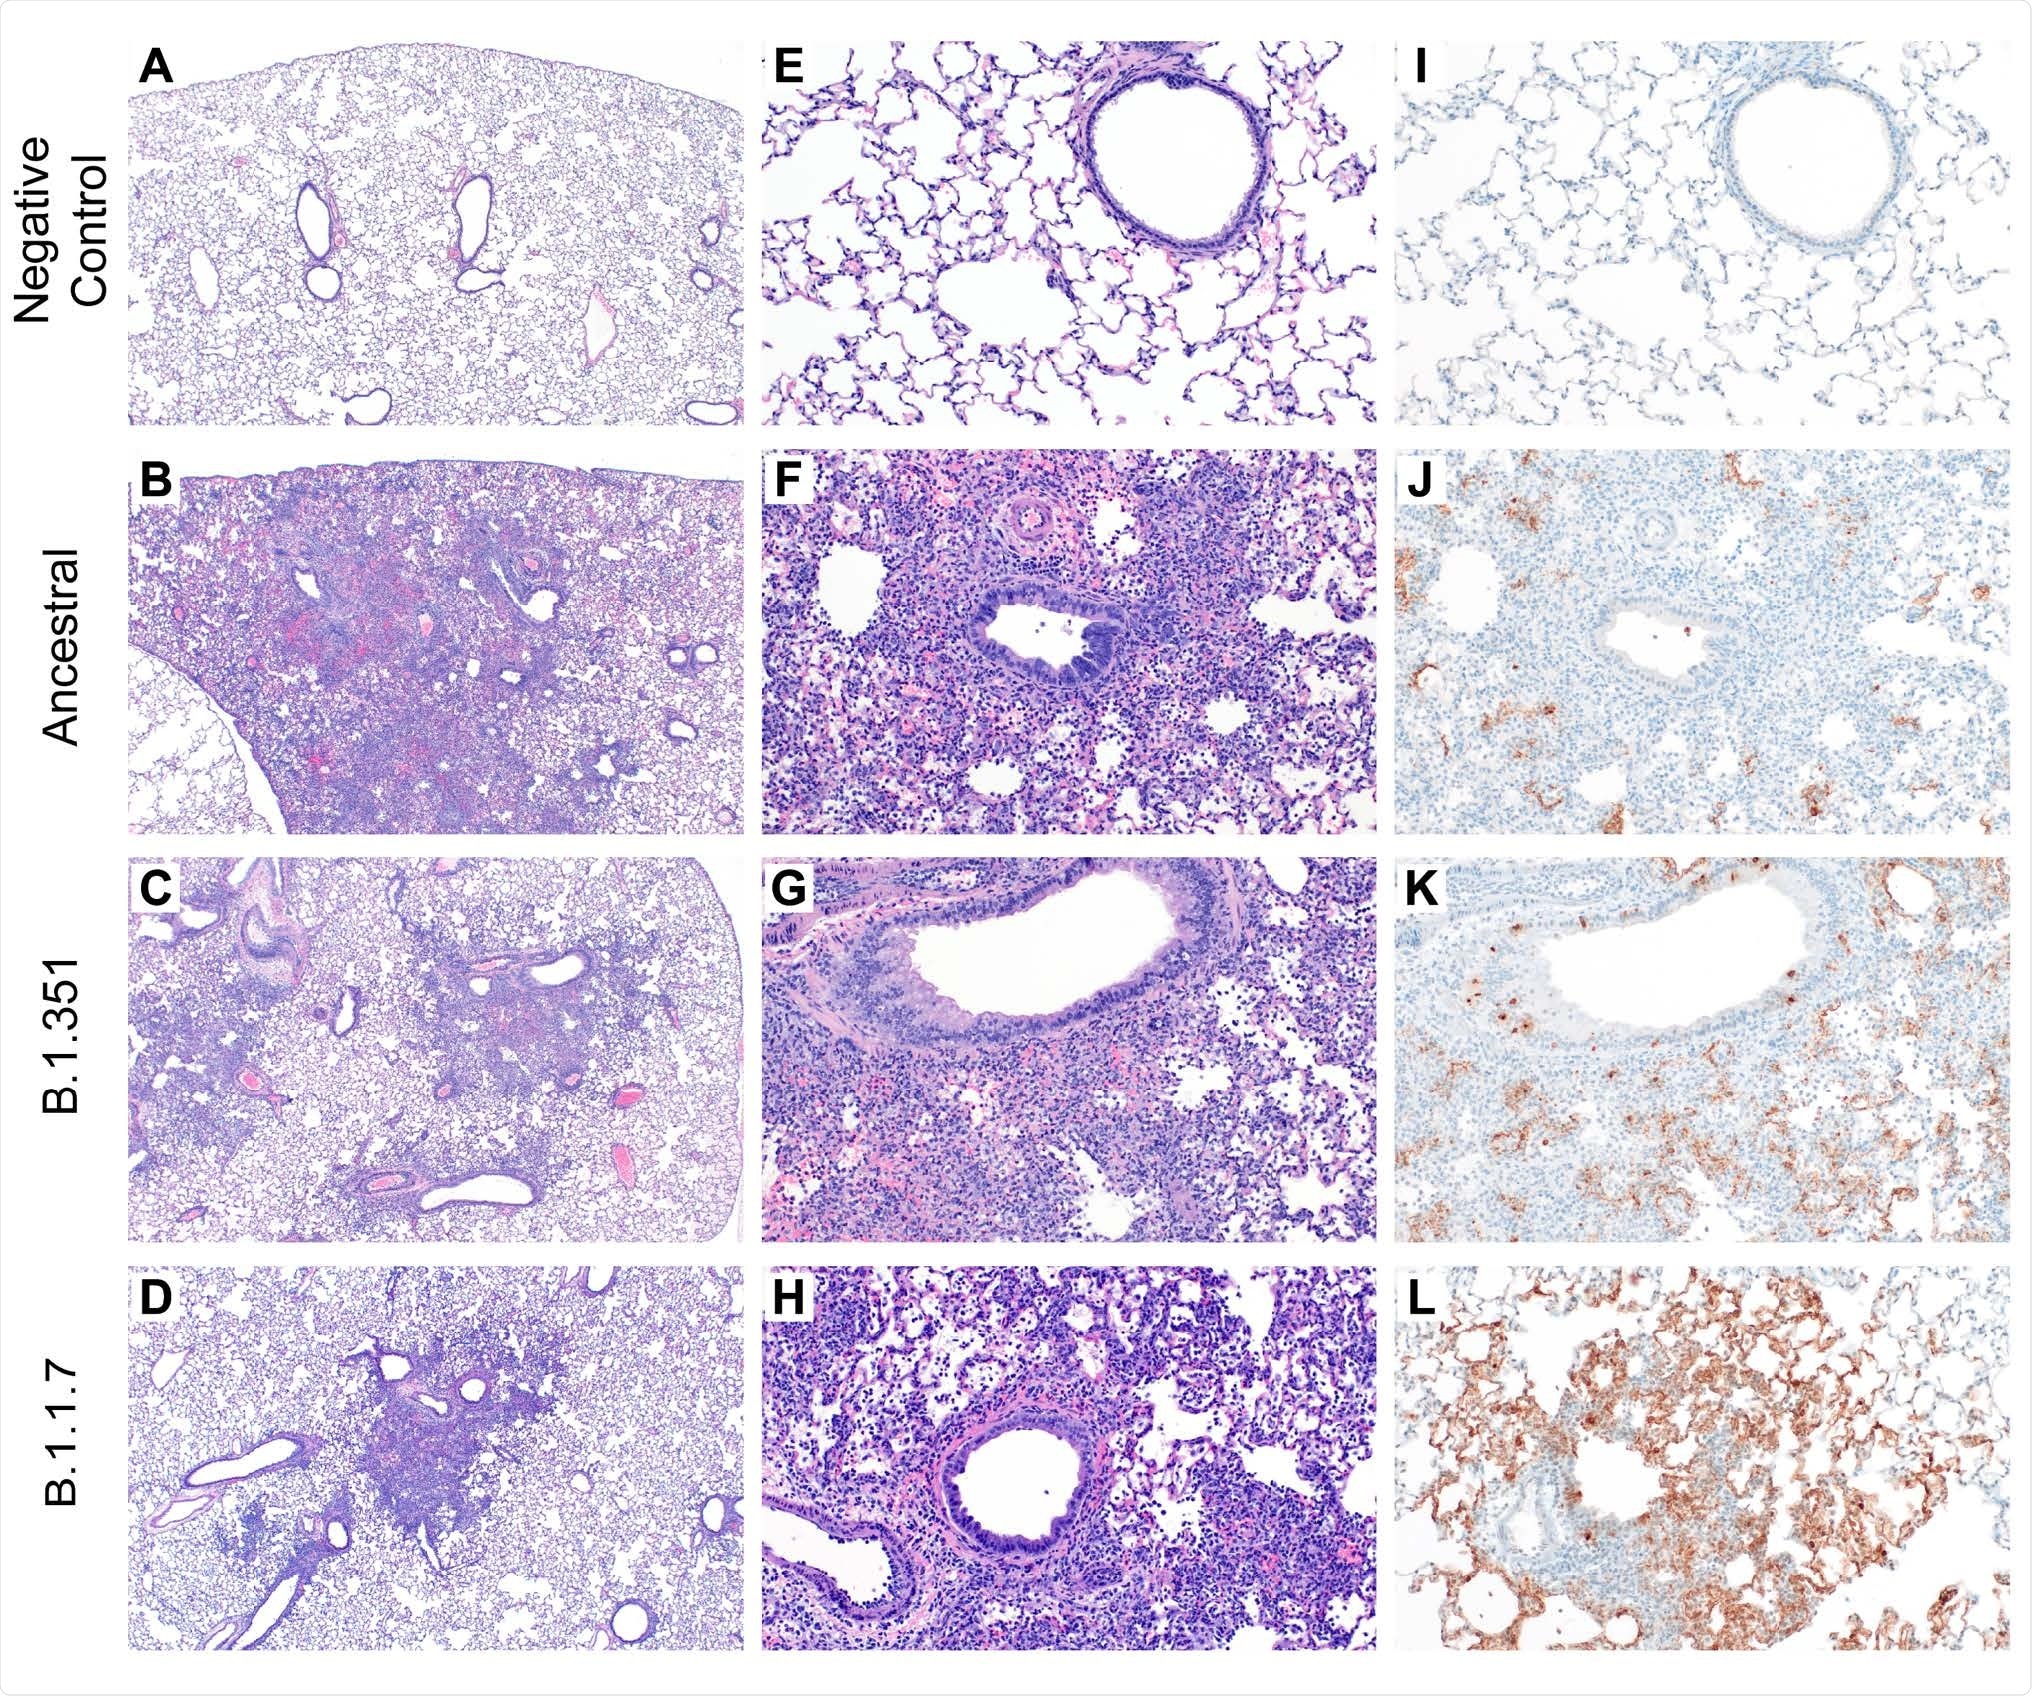 Histopathology and Immunohistochemistry of hamster lungs. (A-H) Representative H&E images of lungs of hamsters infected with 105 TCID50 of ancestral, B.1.1.7, and B.1.351 variants at 4 days post-challenge (DPC). Foci of interstitial pneumonia and bronchiolitis were observed throughout all evaluated lung lobes of infected hamsters. (I-L) Immunohistochemistry (IHC) detected SARS-CoV-2 nucleocapsid staining in the lungs of all infected hamsters.